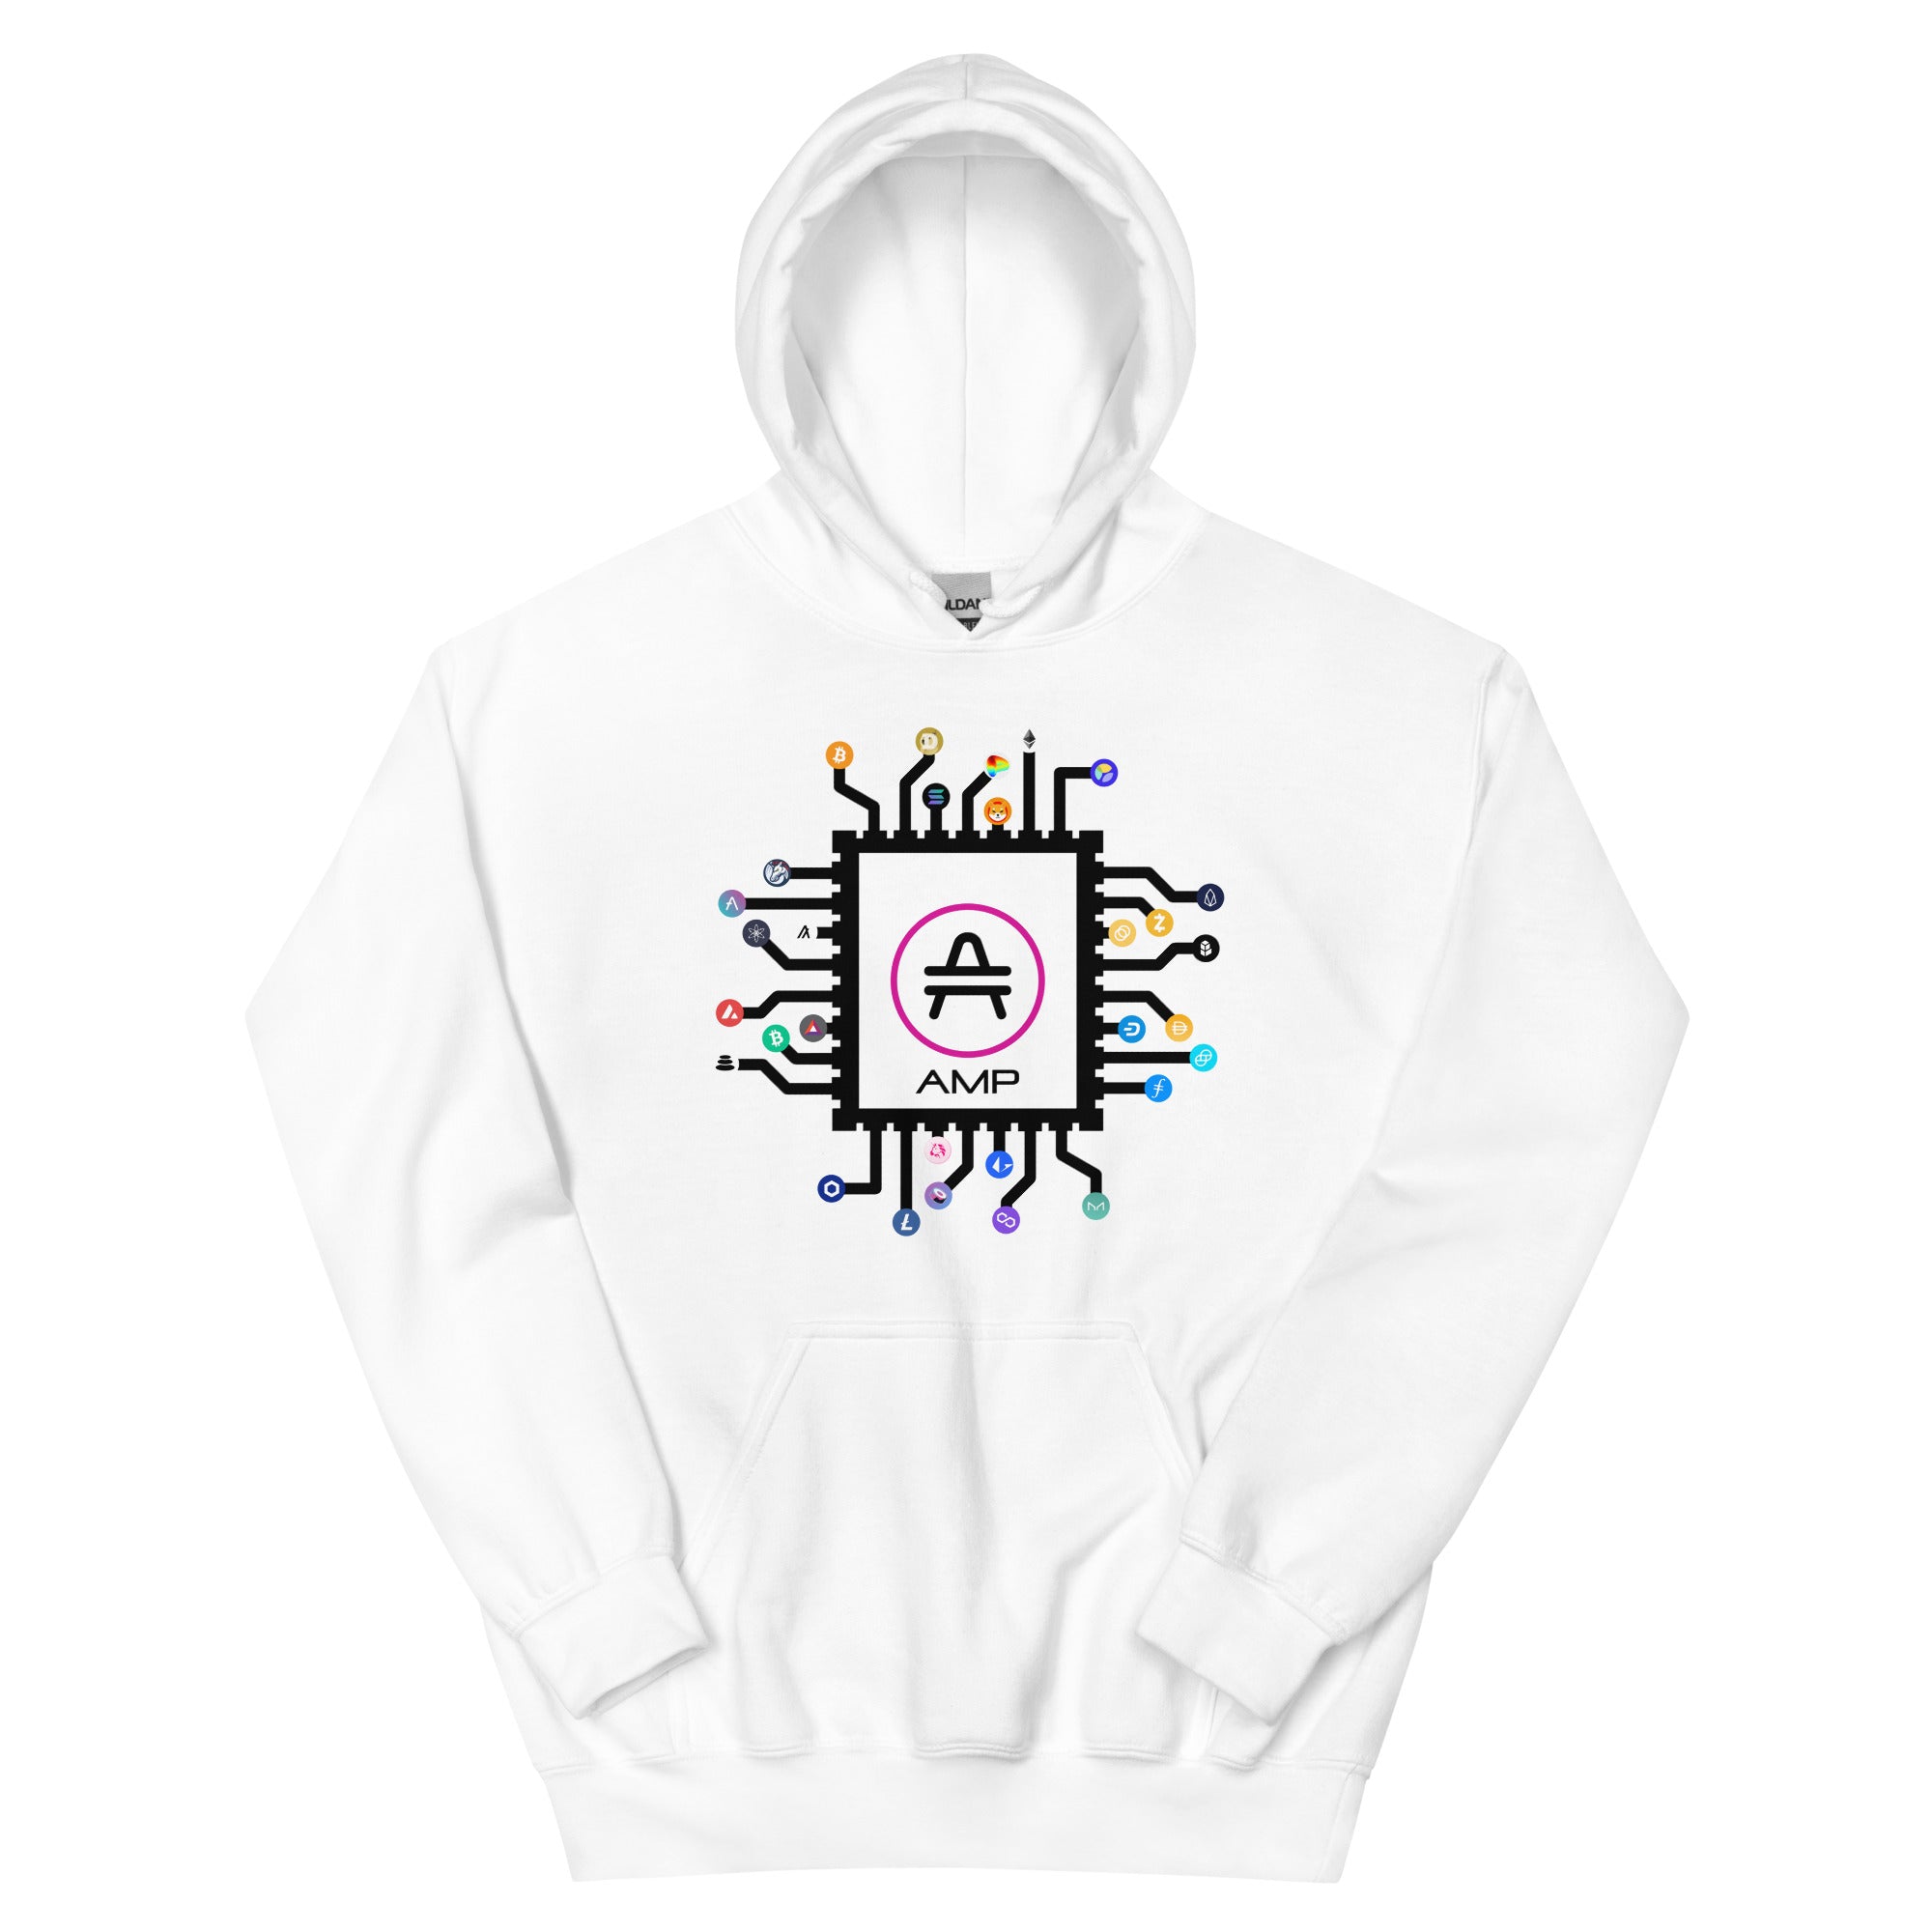 an AMP Swagg CPU hoodie in white